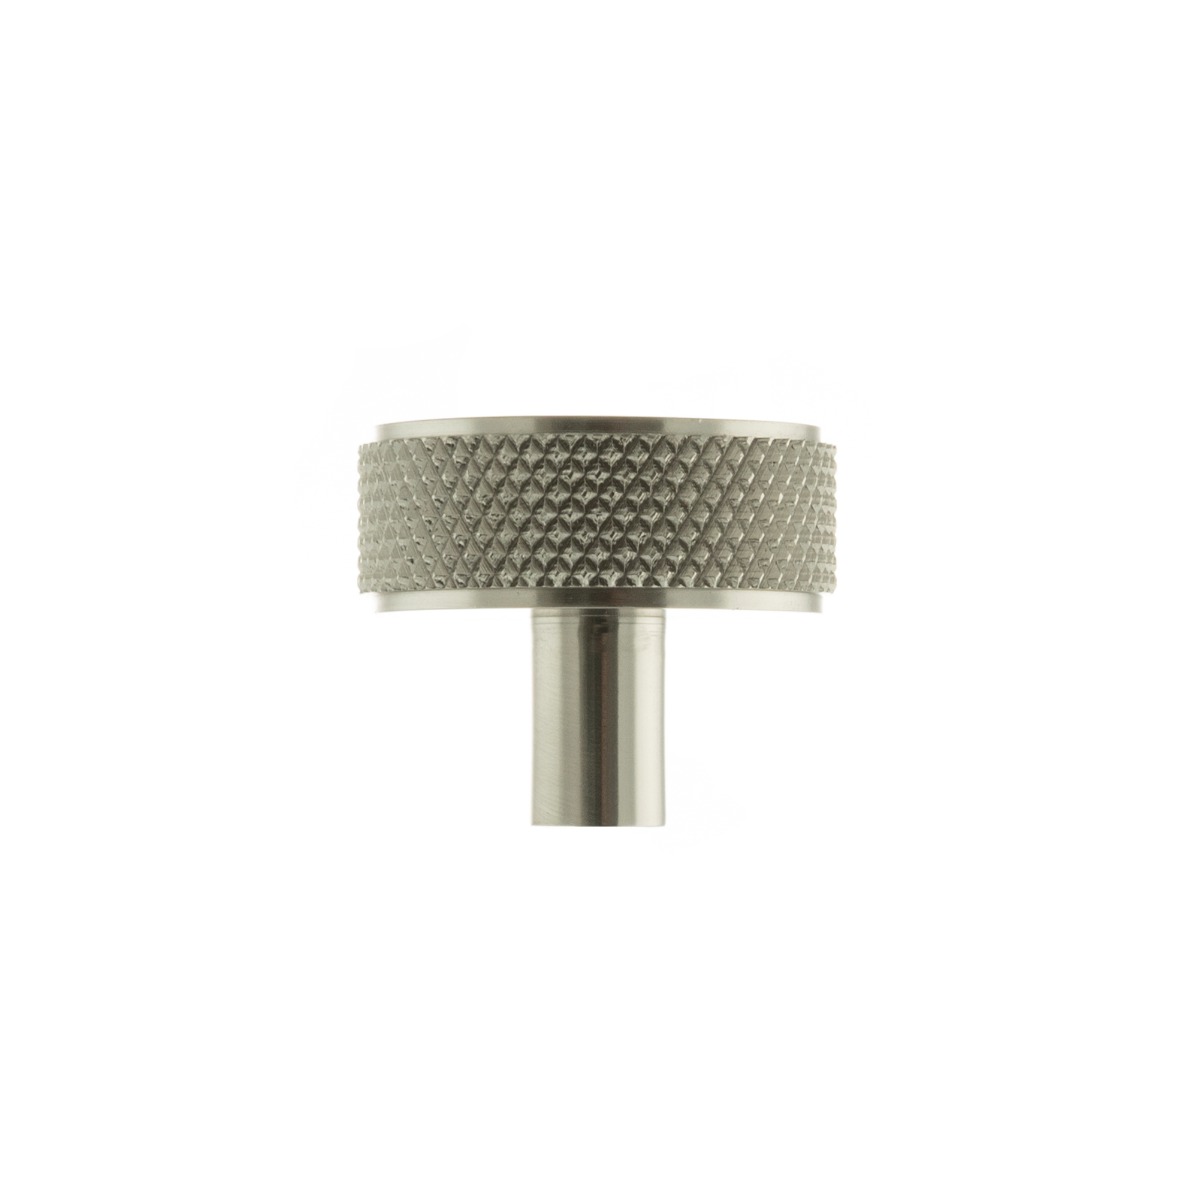 Millhouse Brass Hargreaves Disc Knurled Cabinet Knob on Concealed Fix - Satin Nickel MHCK1935SN